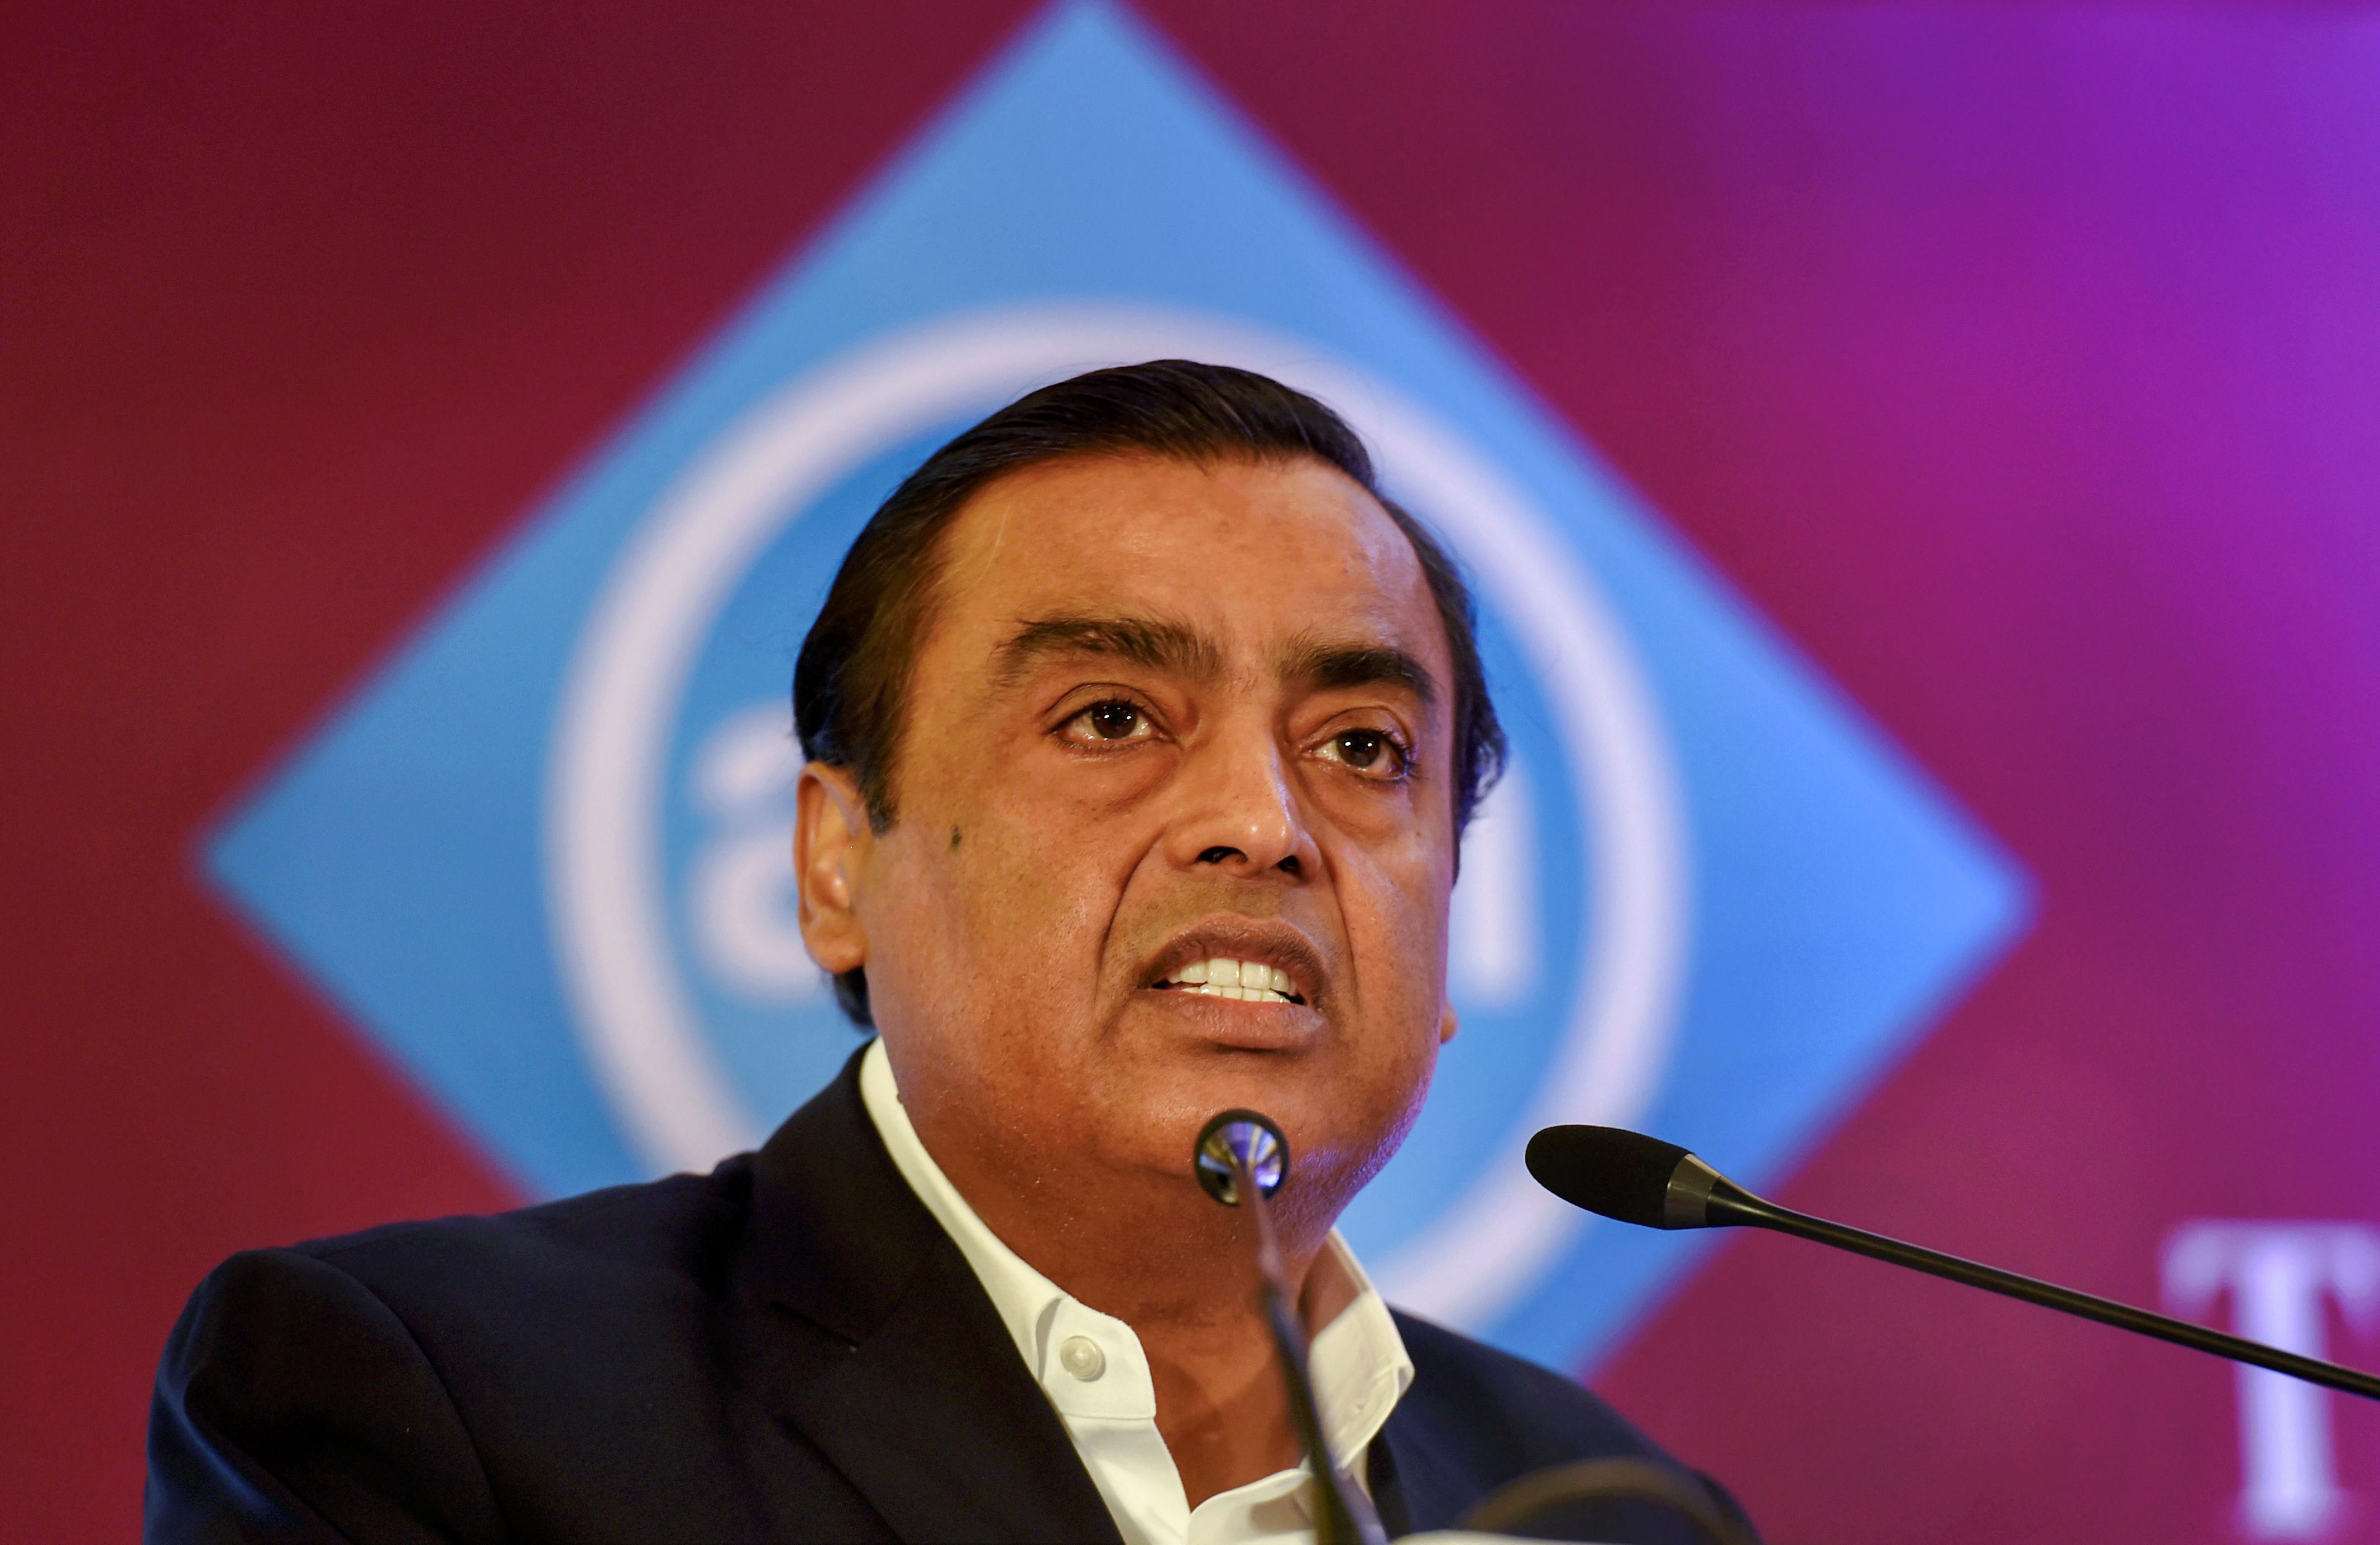 reliance industries' market capitalisation hits rs 20 lakh crore